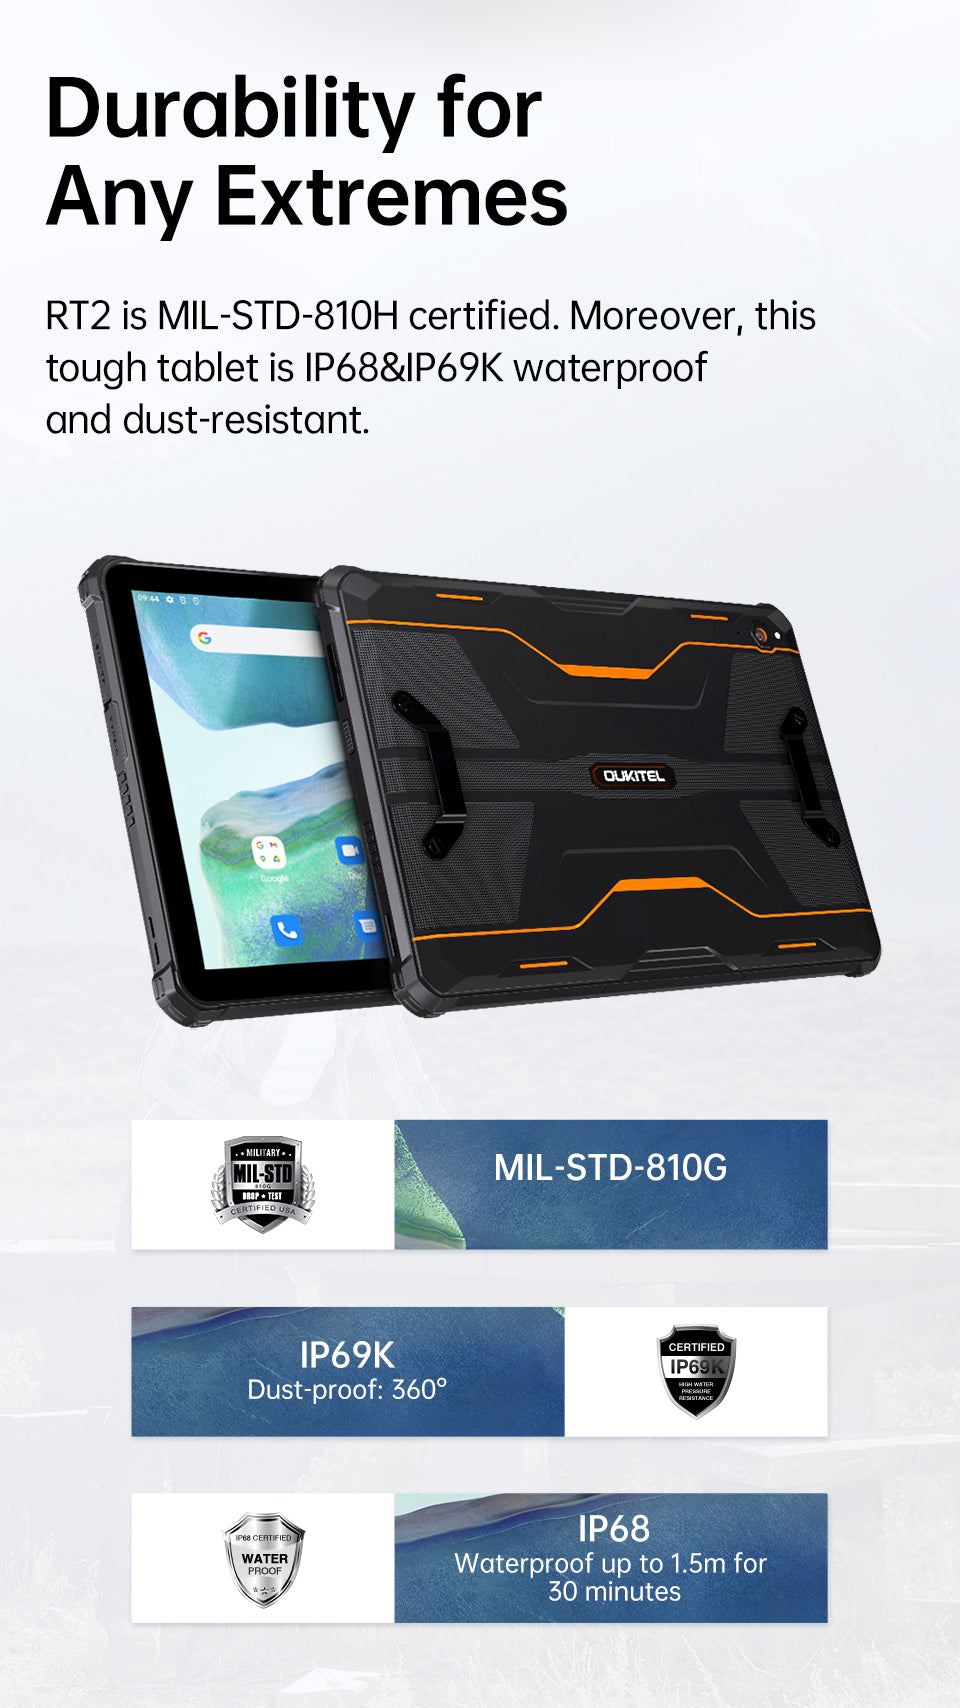 Oukitel RT2 Rugged Tablet, 20000mAh Android 12 8GB+128GB 10.1FHD+ 4G  Tablets PC for Business Work Home Use